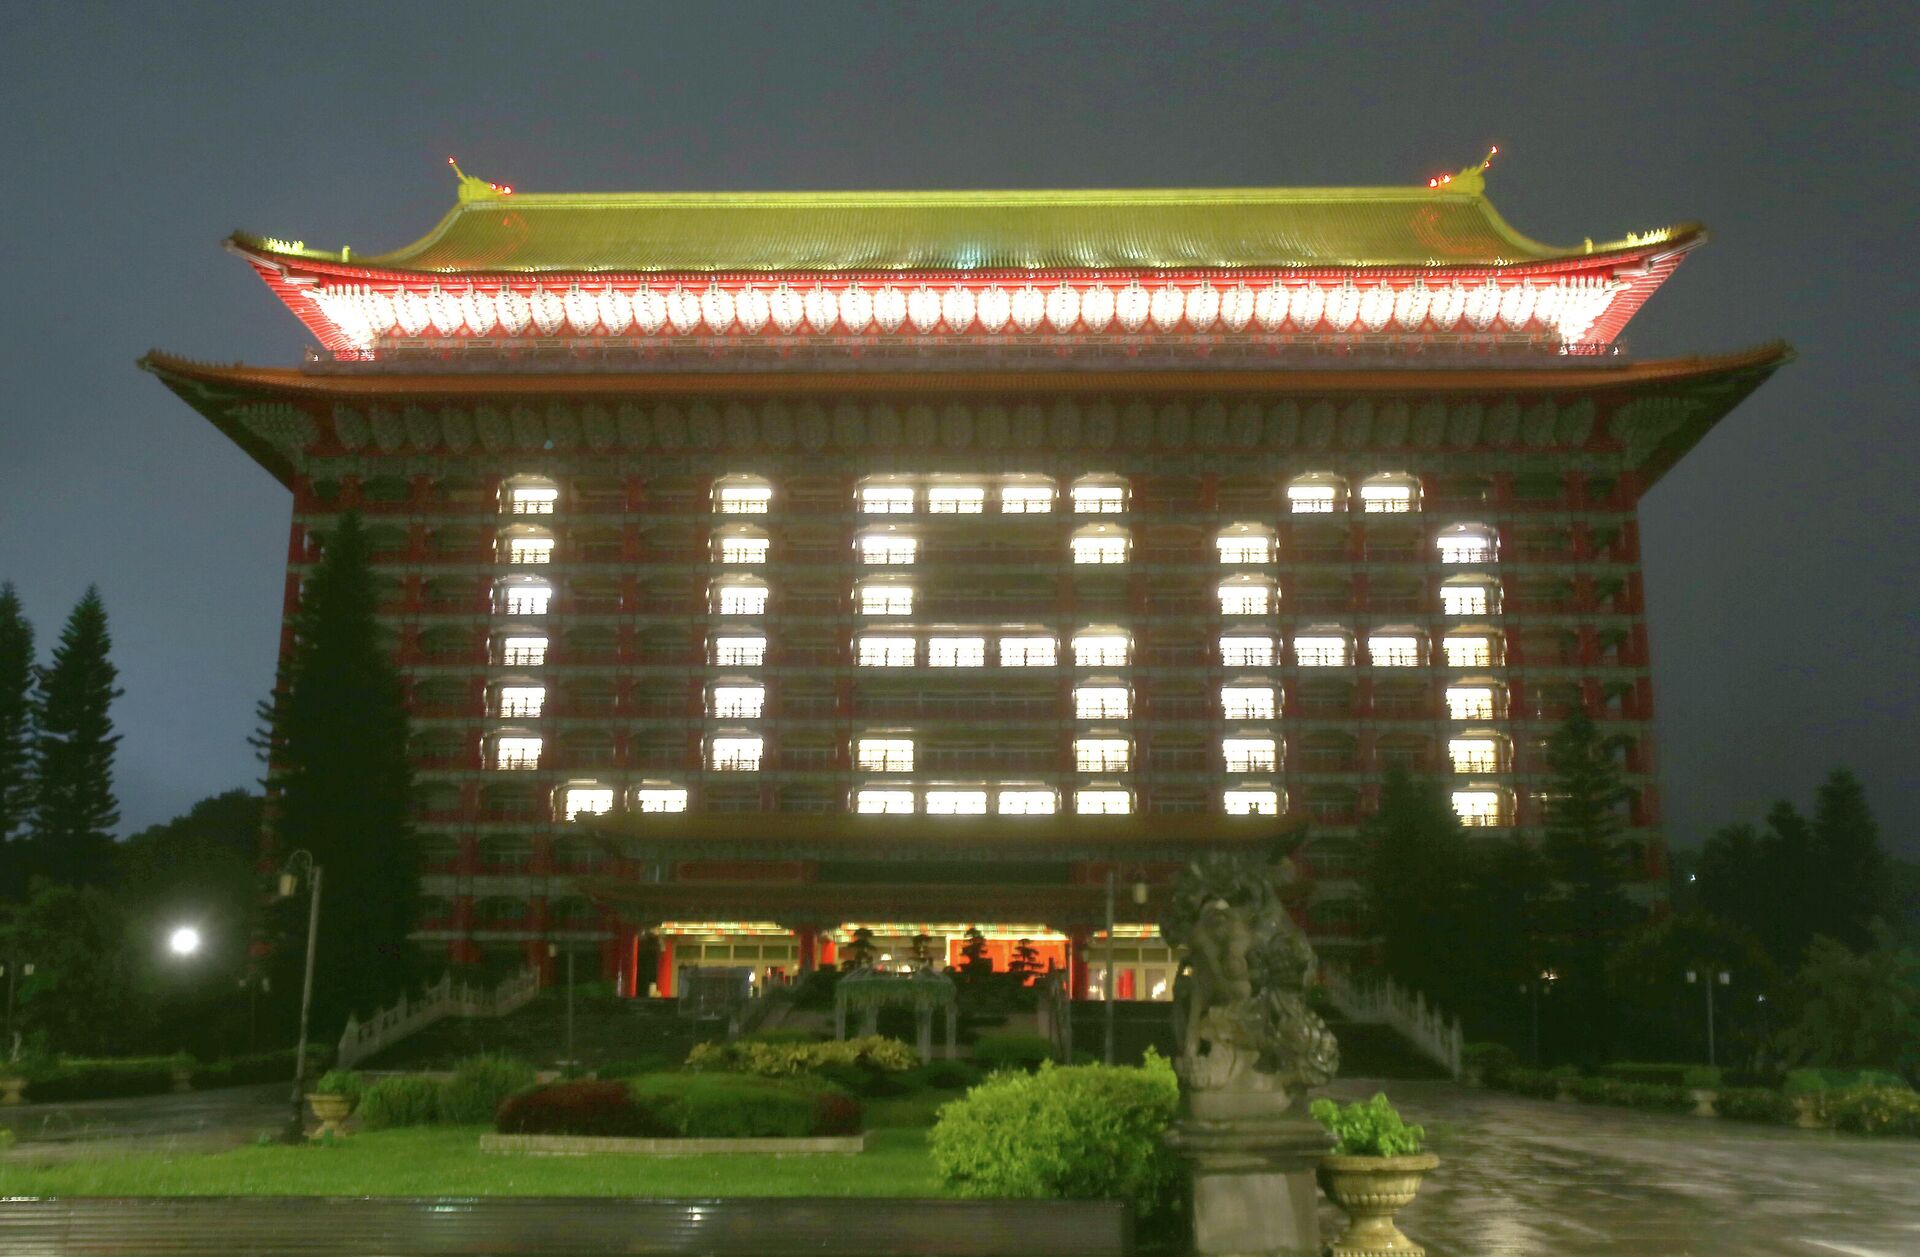 ''USA'' is formed by lighting on the Taipei Grand Hotel, to thank the U.S. who will give Taiwan 750,000 doses of COVID-19 vaccine after the COVID-19 alert rose to level 3 , in Taipei, Taiwan, Sunday, June 6, 2021. Taiwan is desperate for vaccines after a sudden outbreak that started in late April caught authorities by surprise - Sputnik International, 1920, 29.07.2022